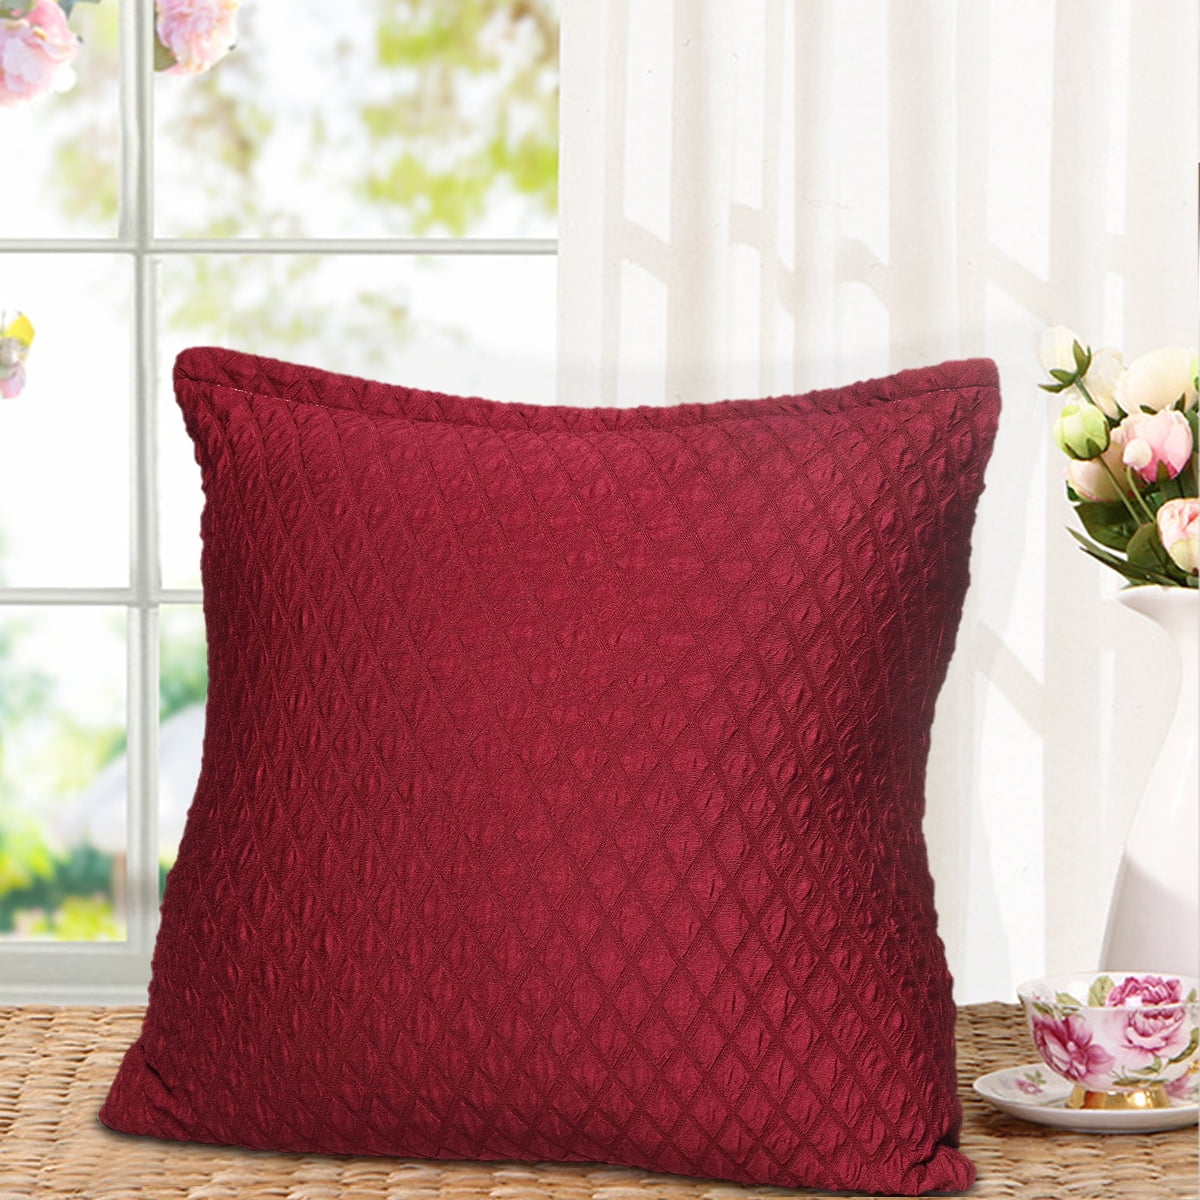 17.7x17.7" Solid Cushion Cover Decorative Throw Pillow ...